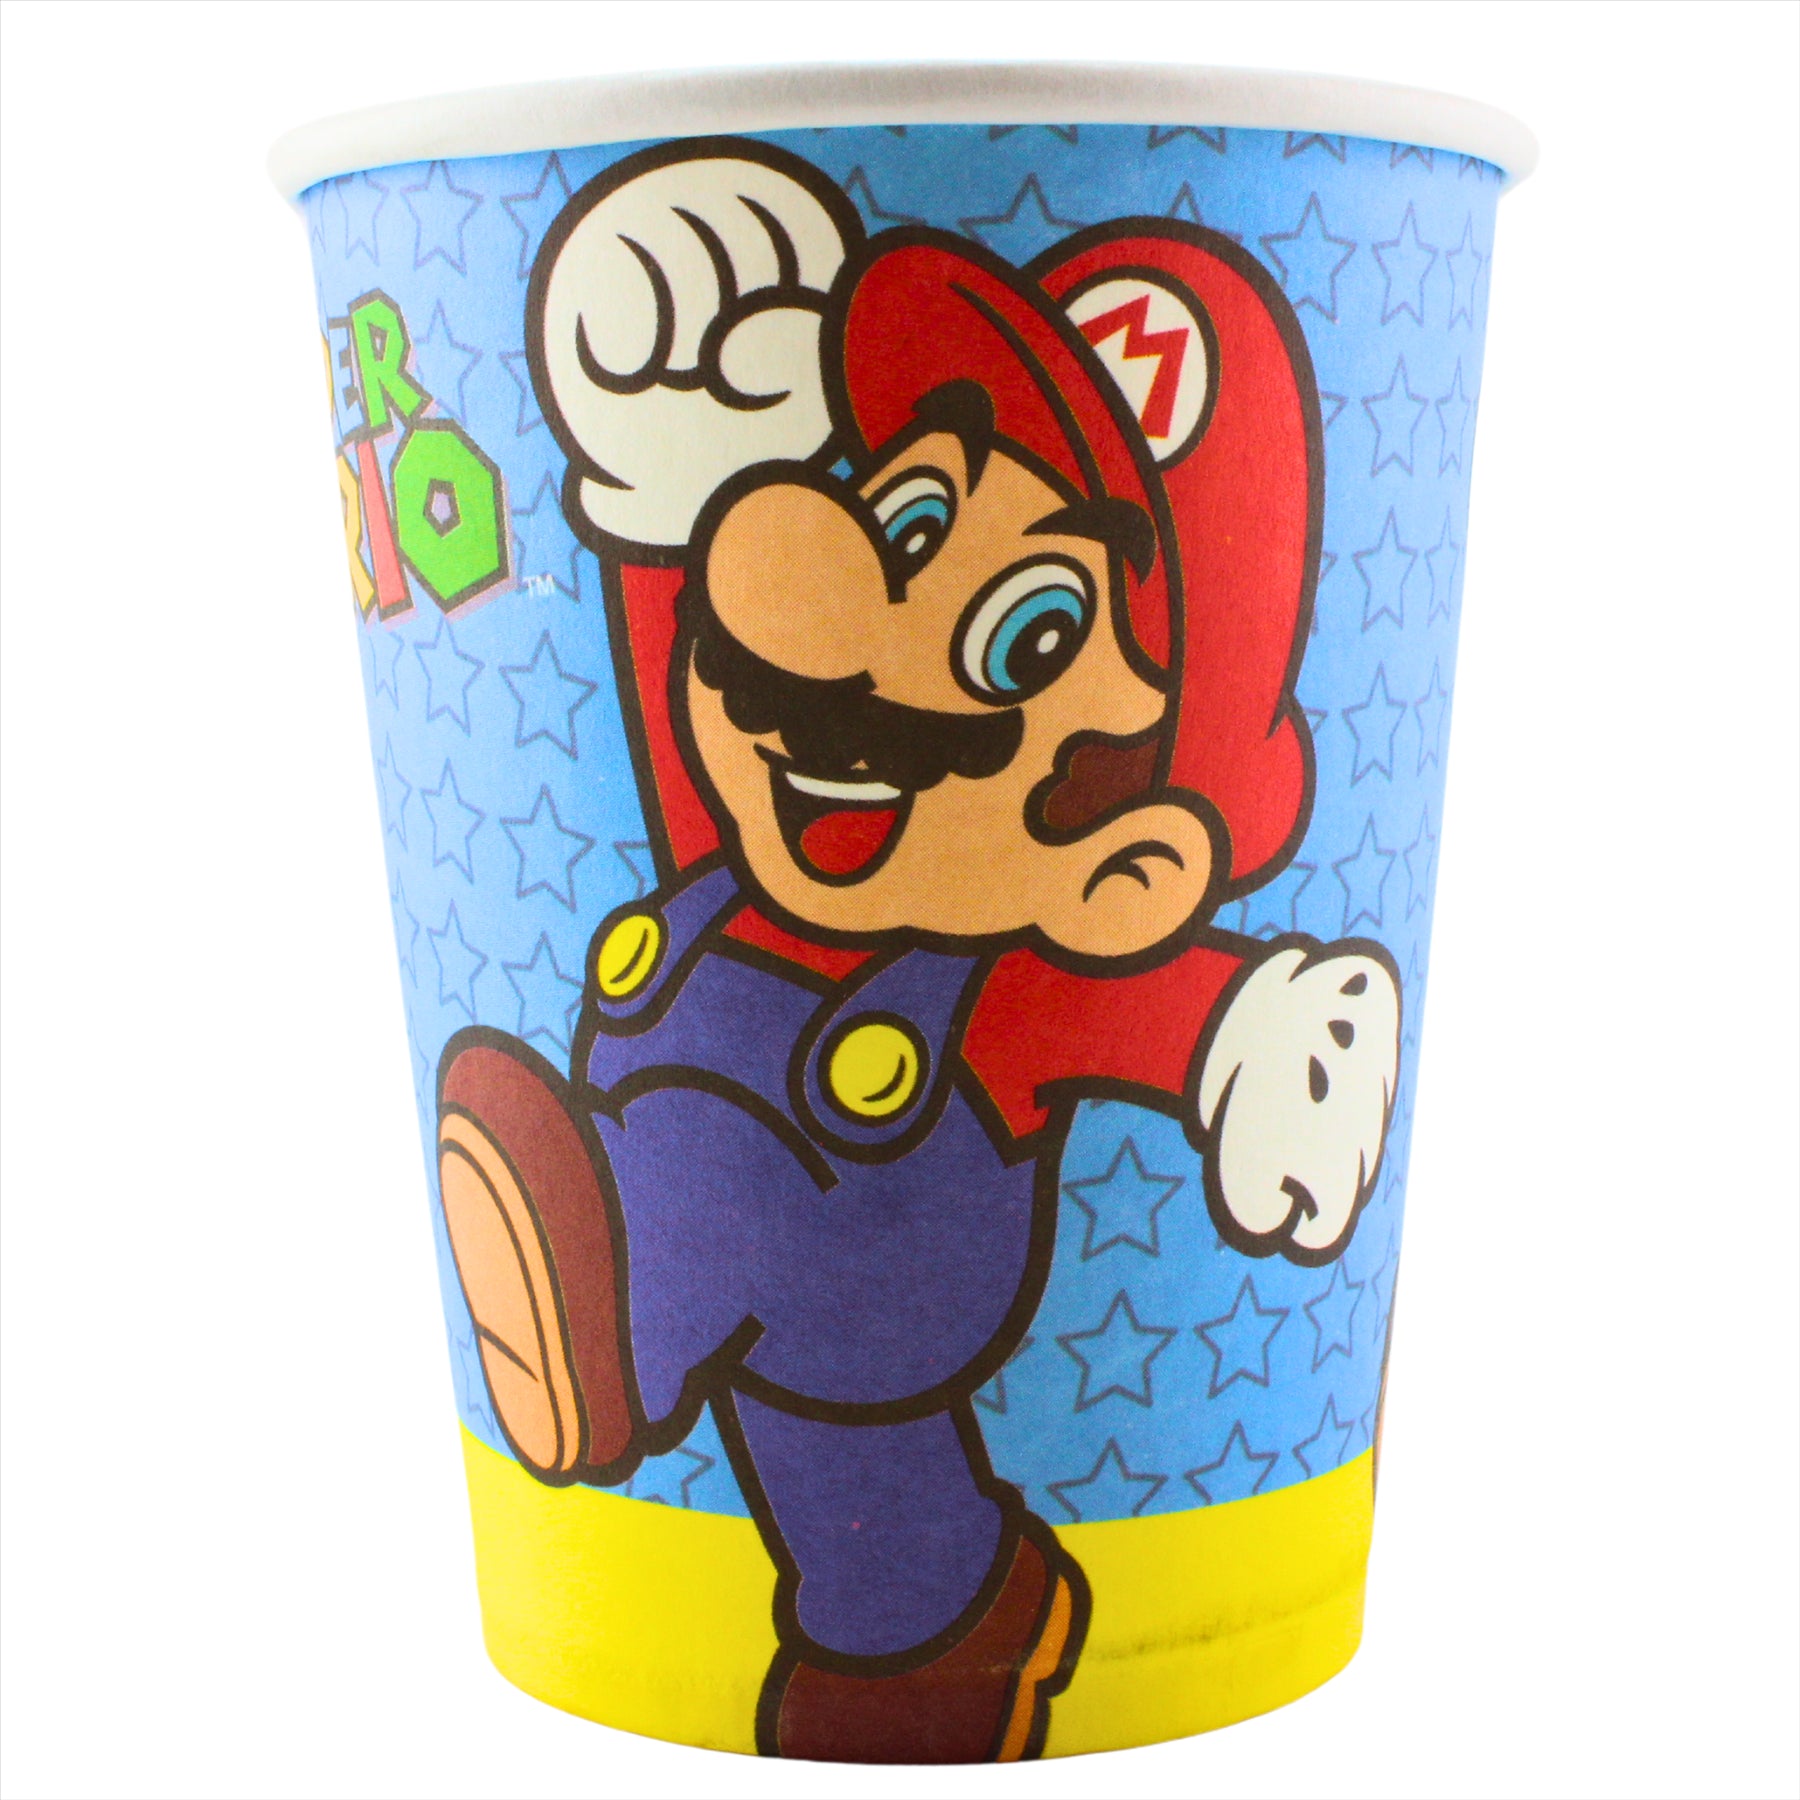 Super Mario Partyware - Paper Cups Pack of 24 - Toptoys2u